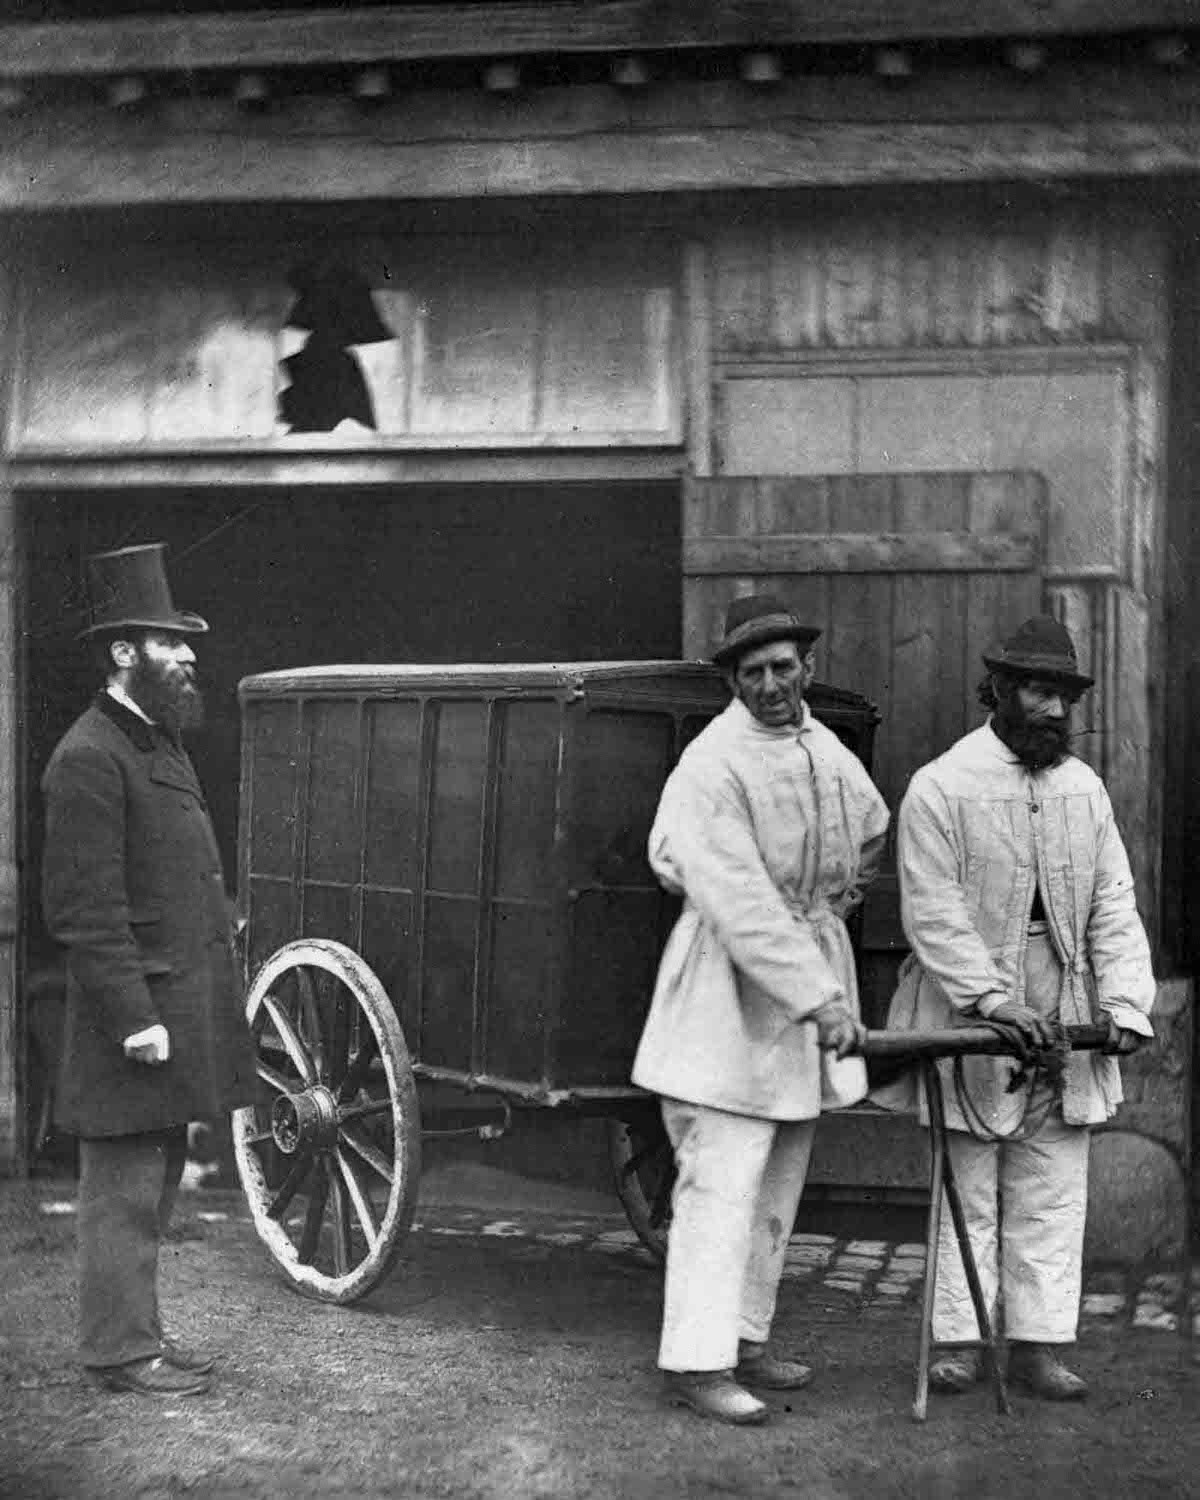 Public disinfectors sanitize the streets after an outbreak of smallpox, 1877.